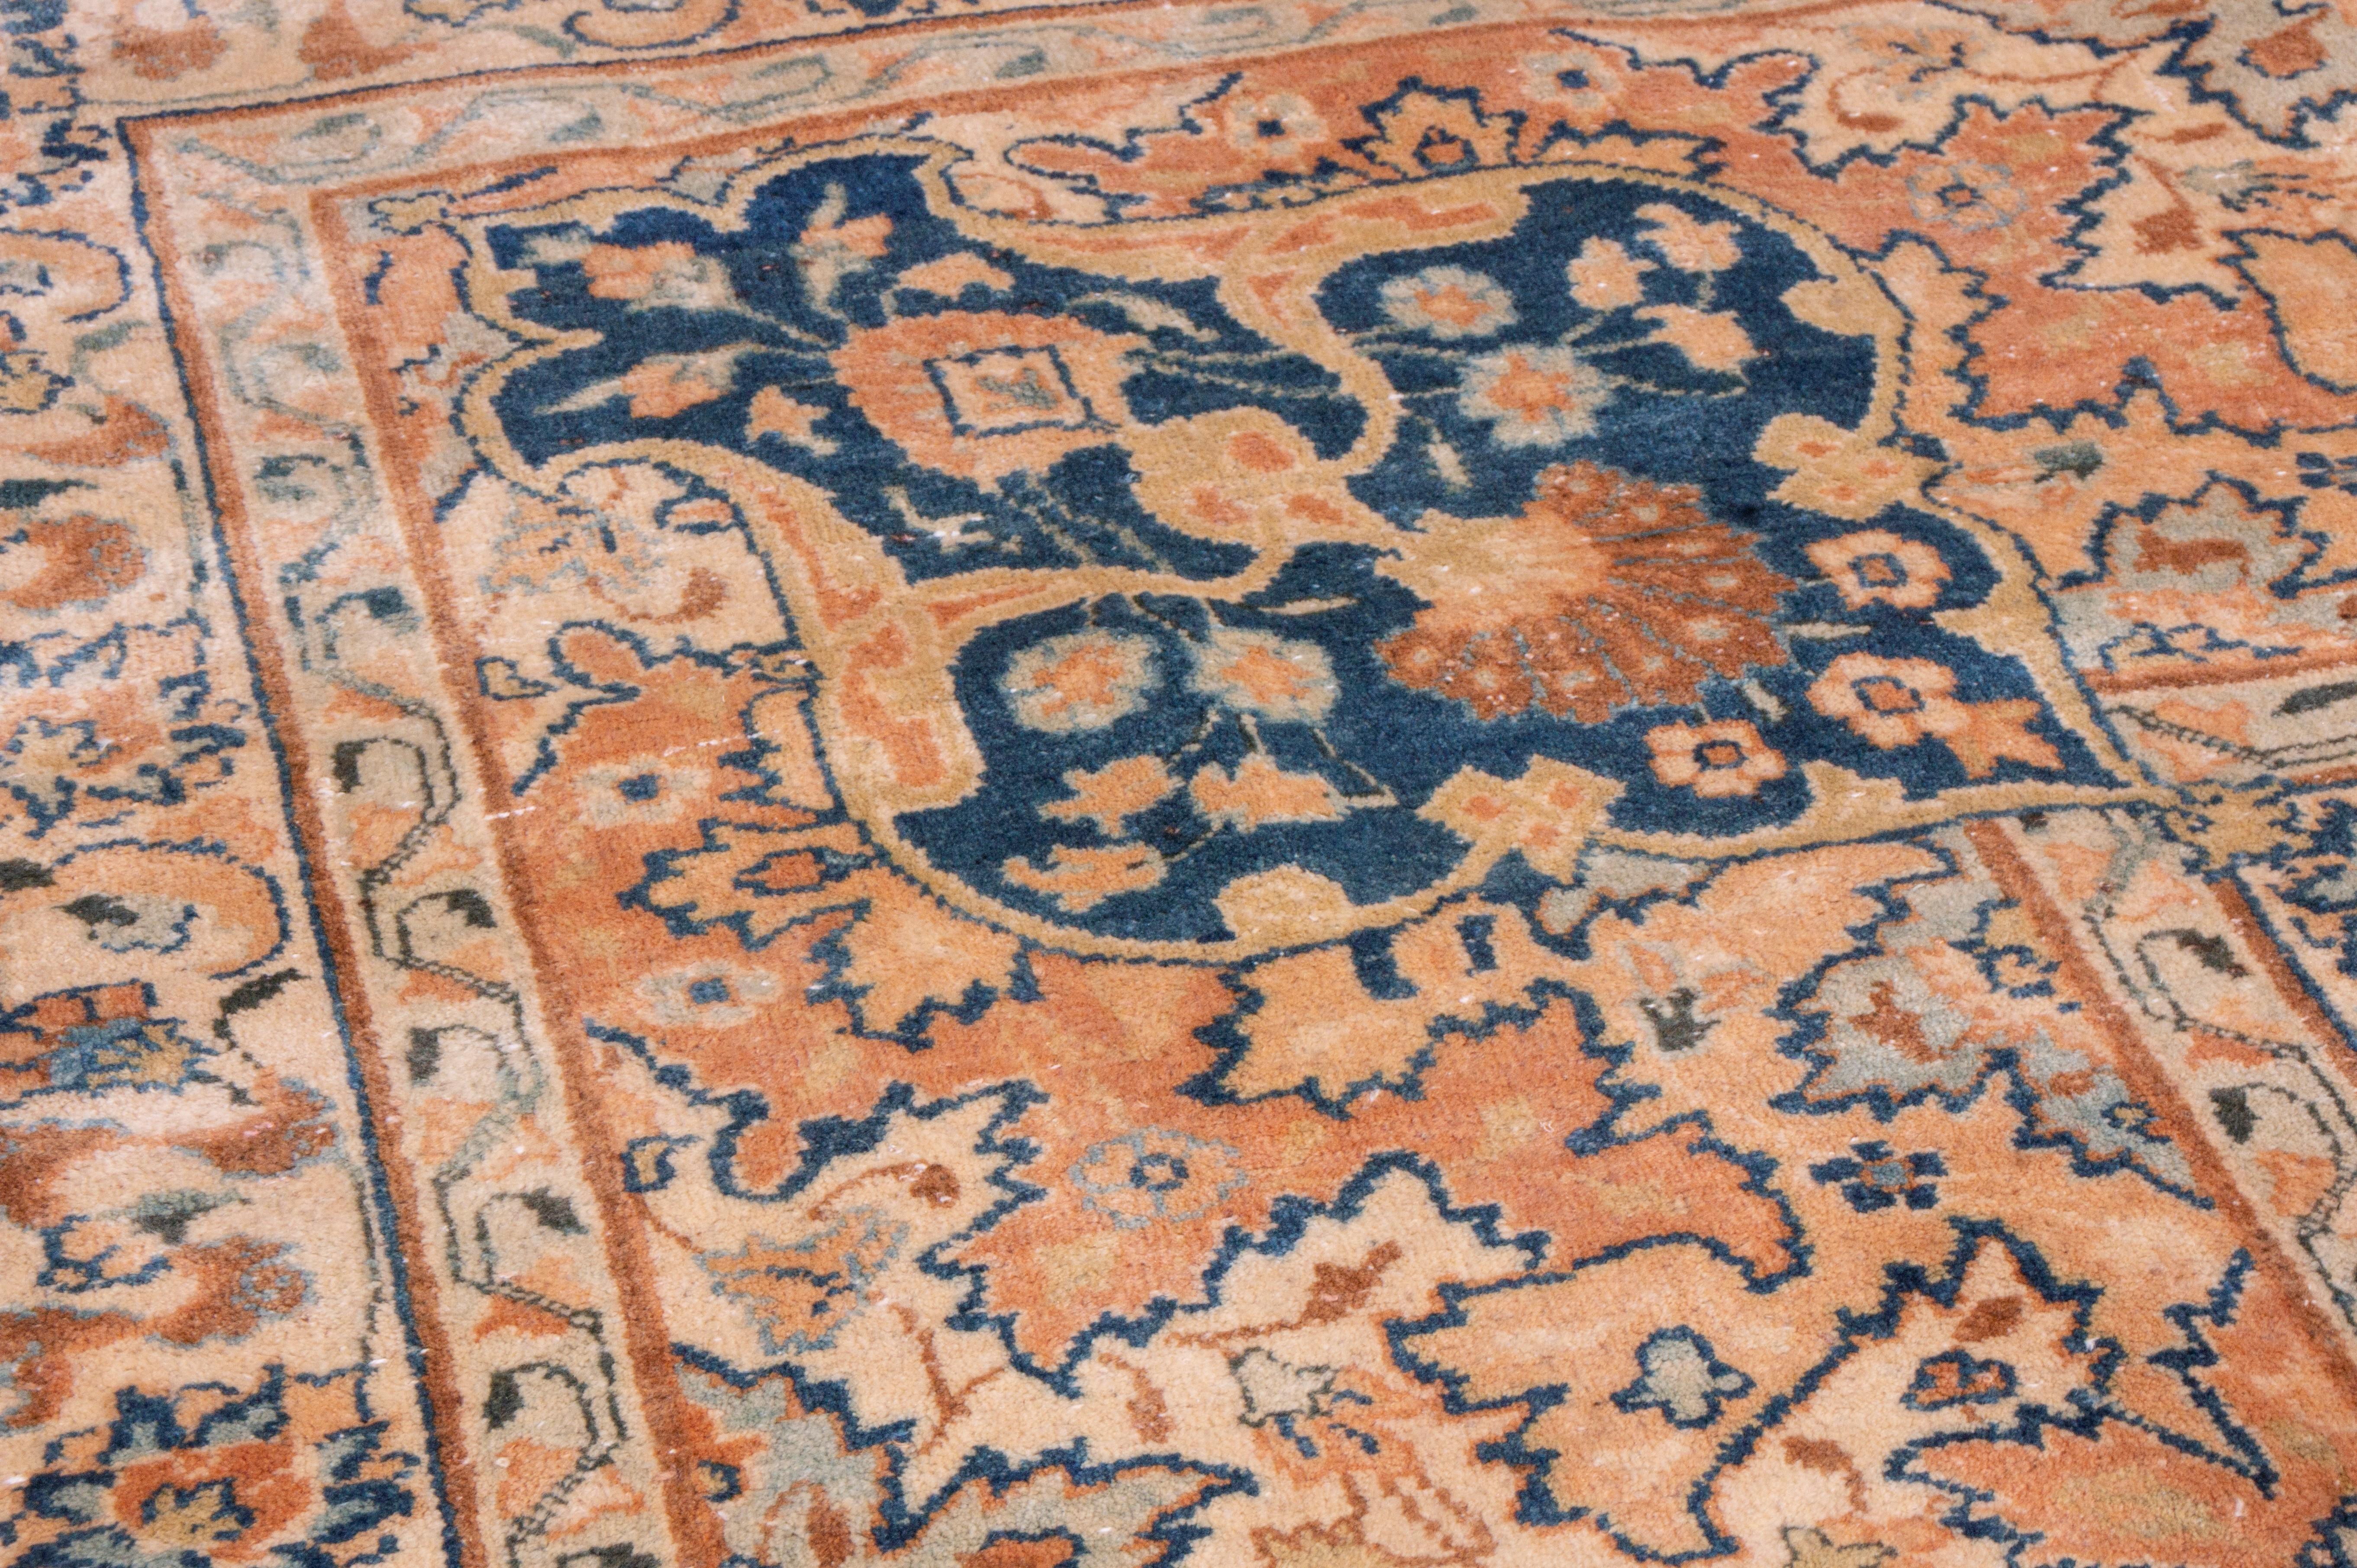 Hand-Knotted Antique Yazd Traditional Blue and Caramel Wool Rug with All-Over Floral Patterns